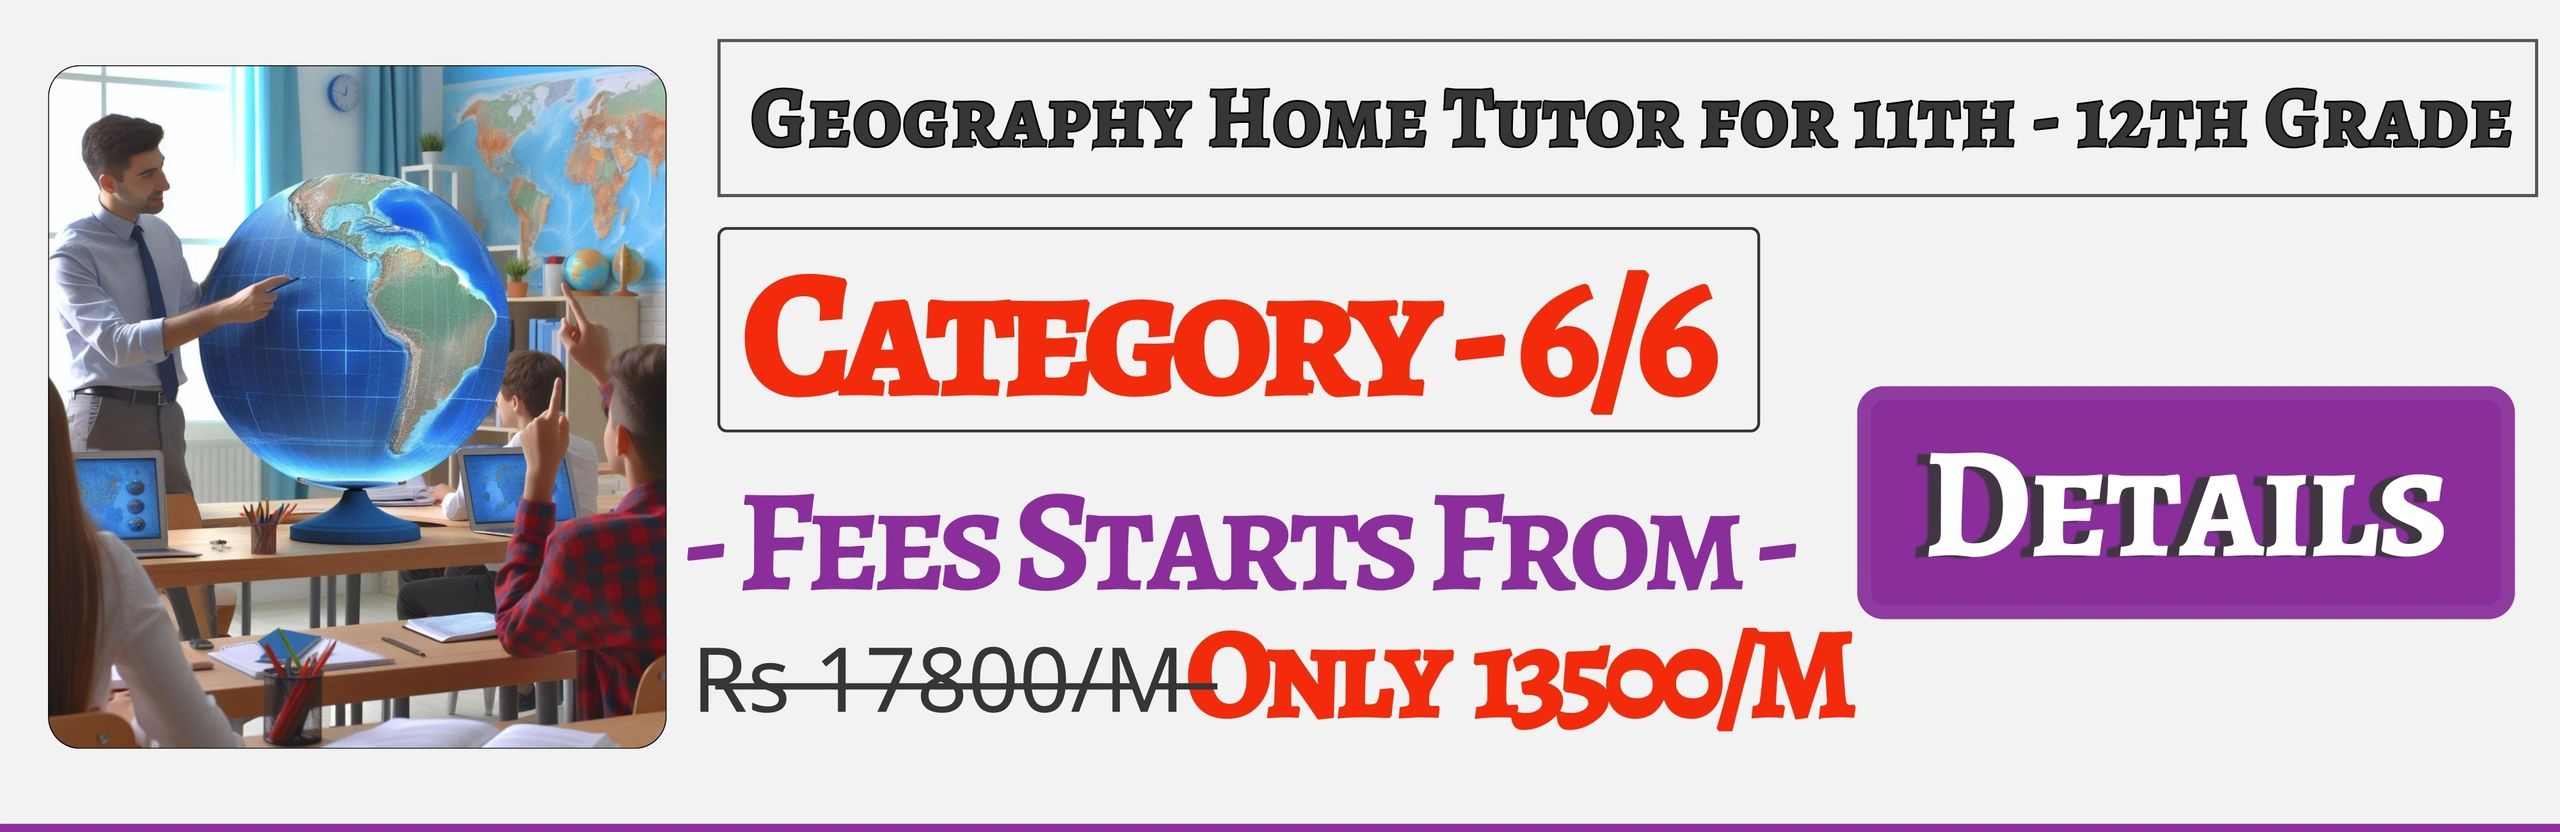 Book Best Nearby Geography Home Tuition Tutors For 11th & 12th In Jaipur , Fees Only 13500/M